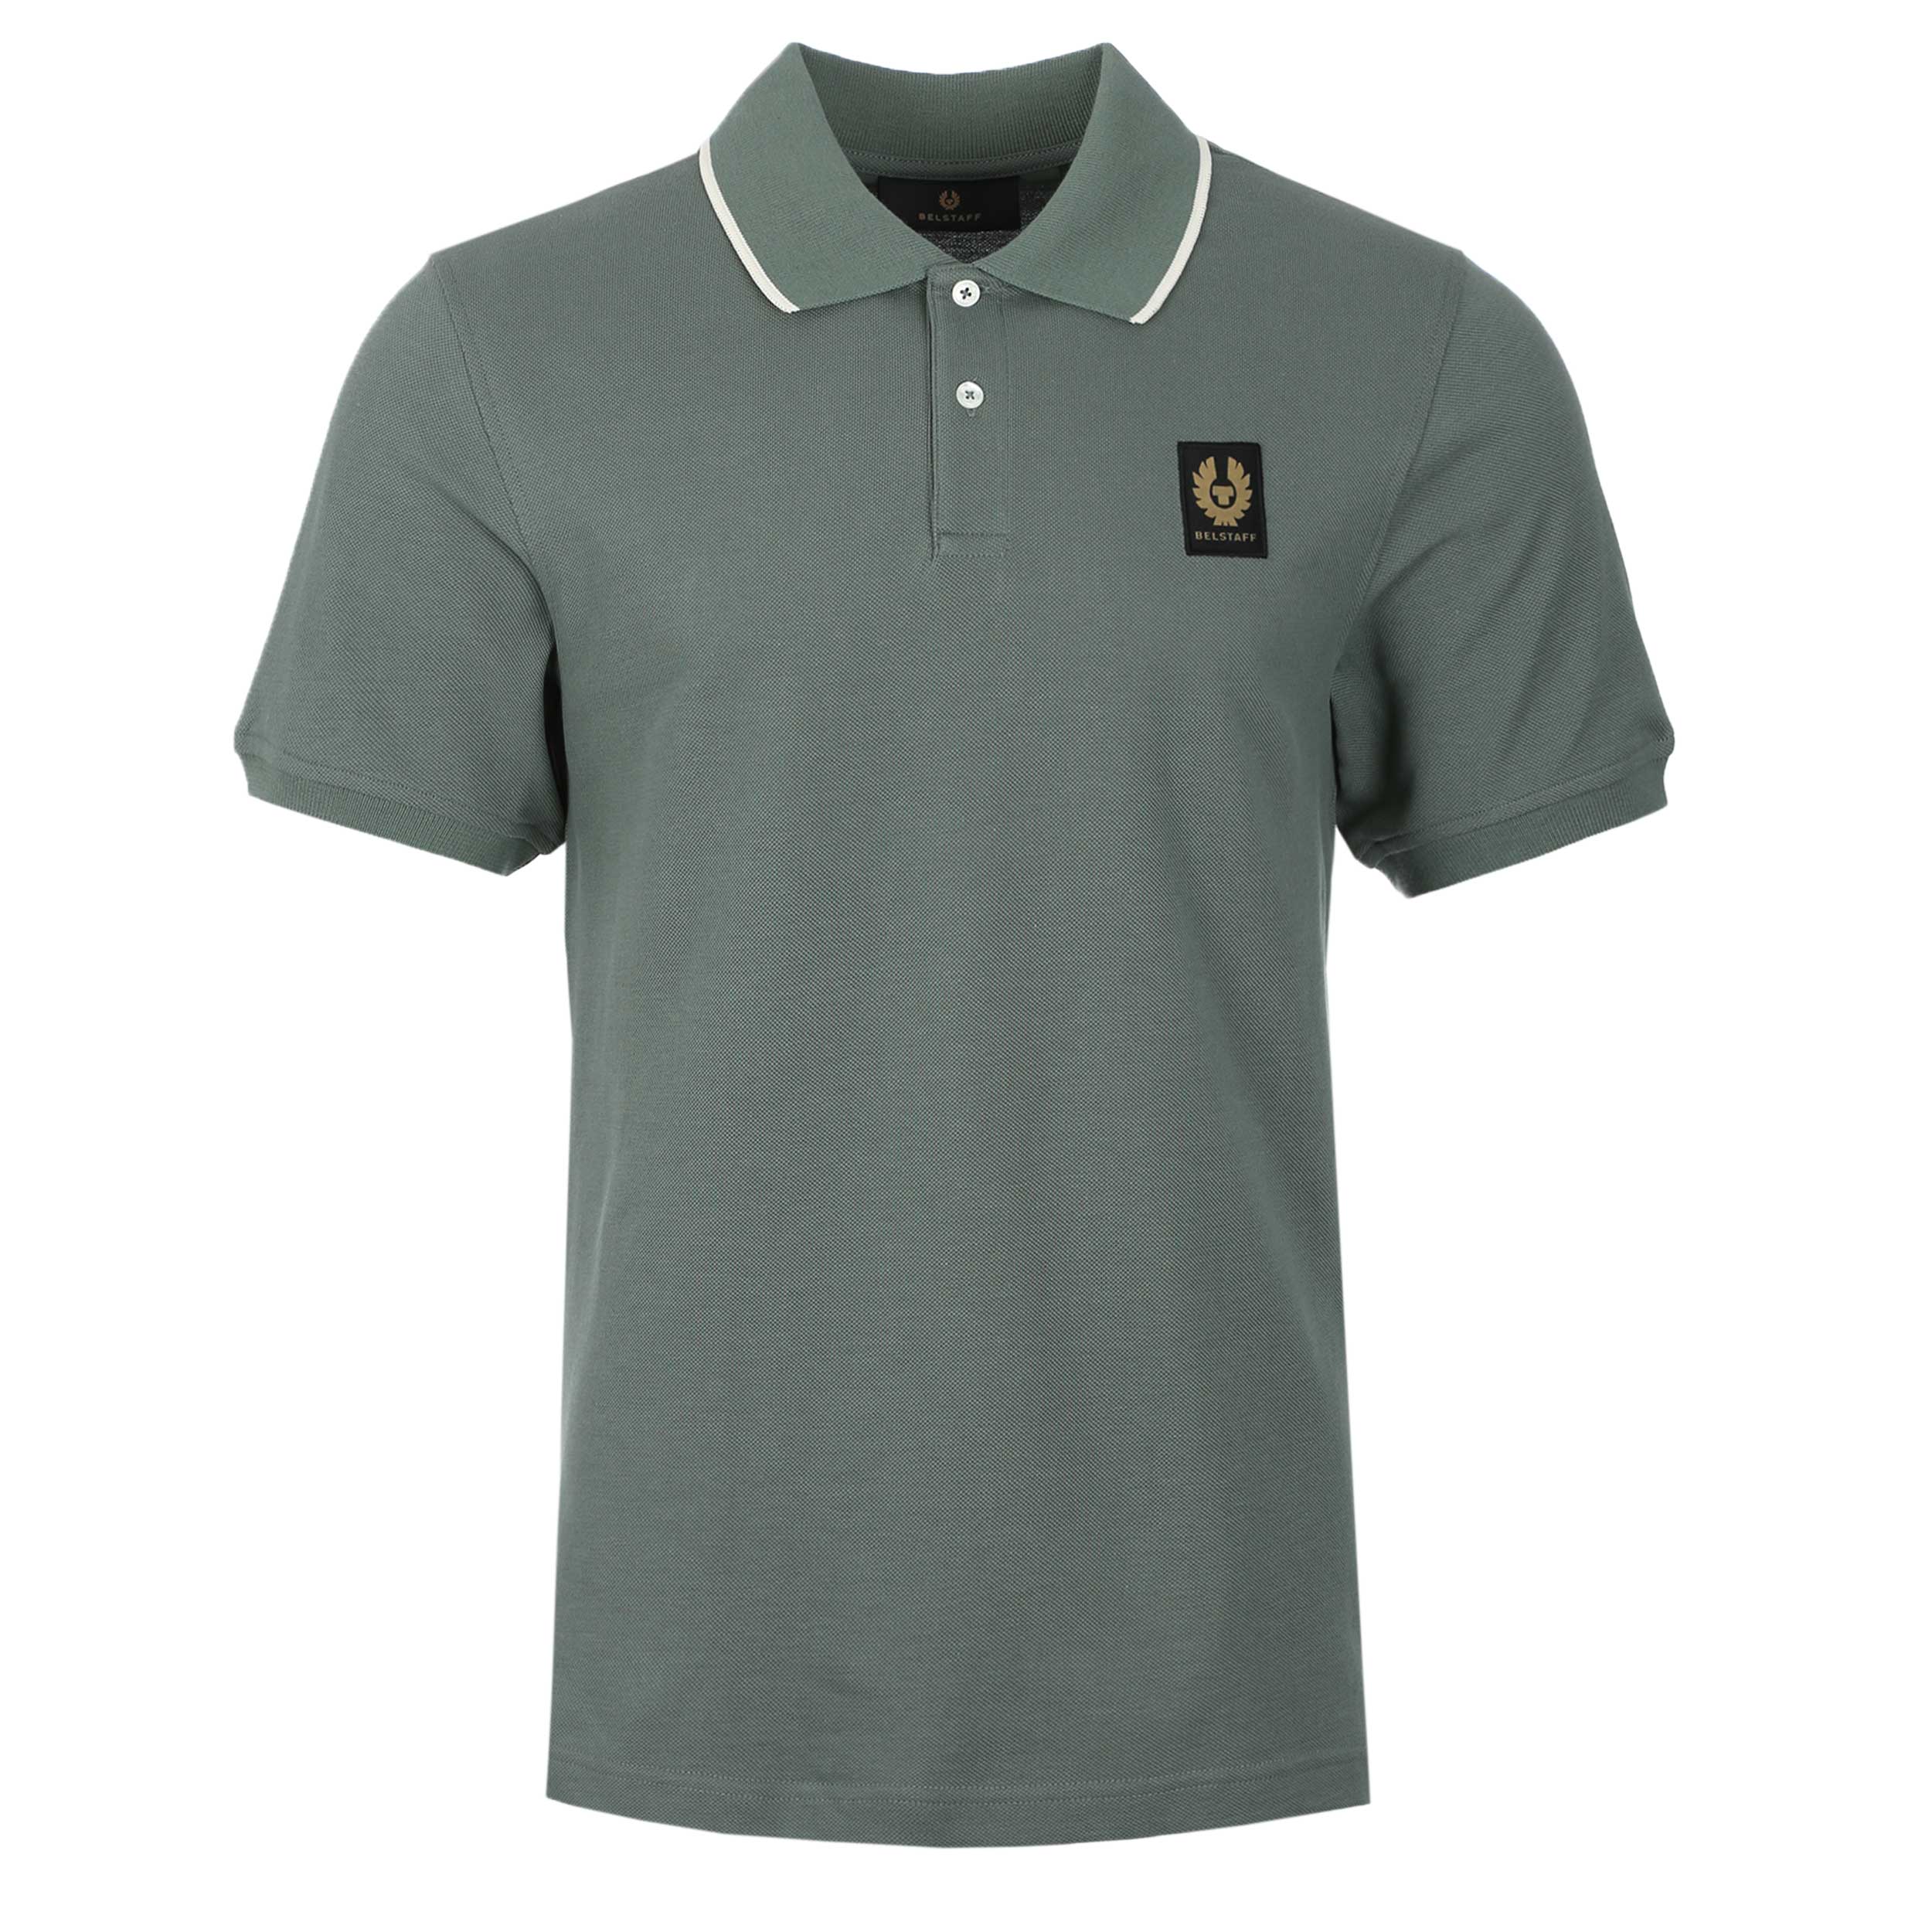 Belstaff Tipped Polo Shirt in Mineral Green